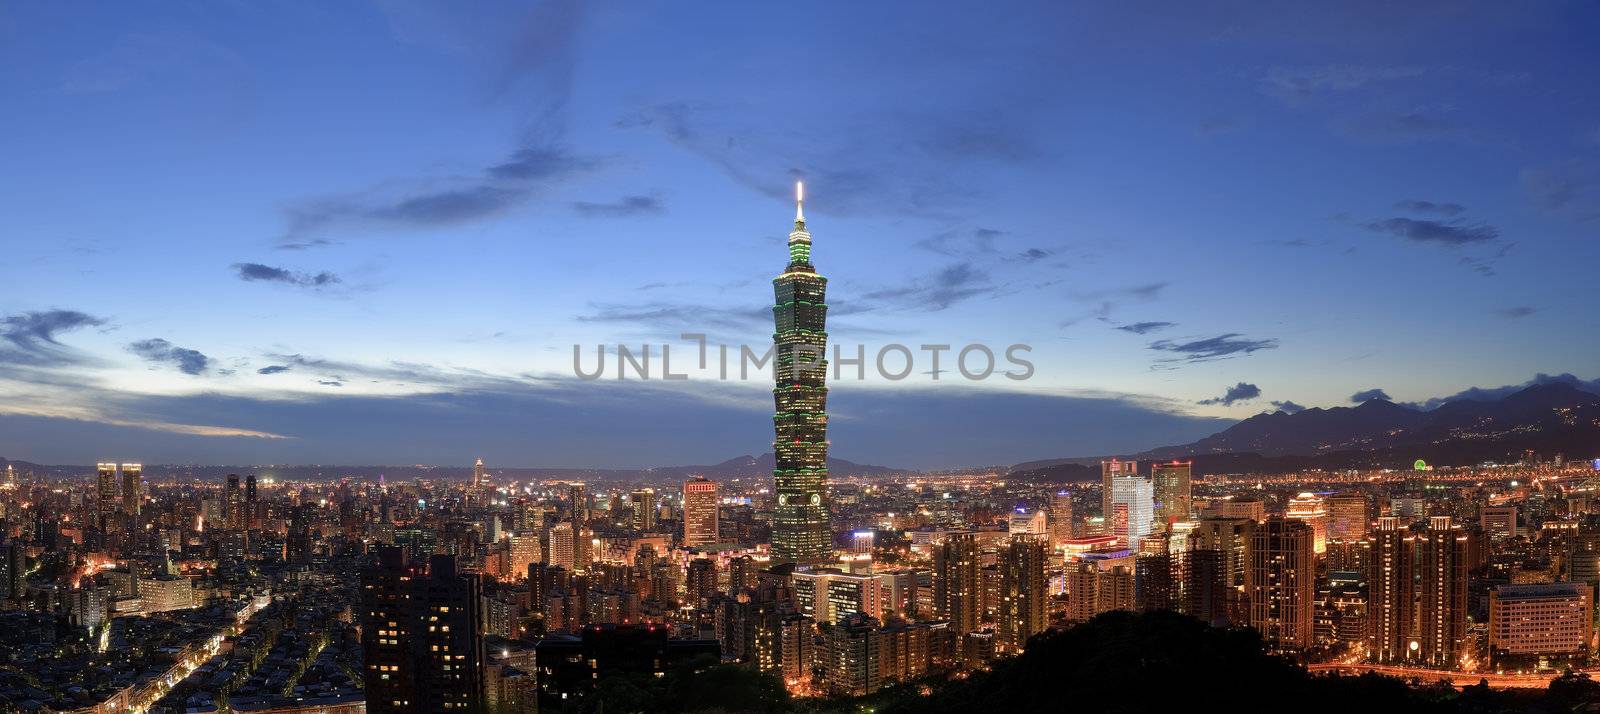 Panoramic city skyline in night with famous 101 skyscraper and buildings in Taipei, Taiwan.